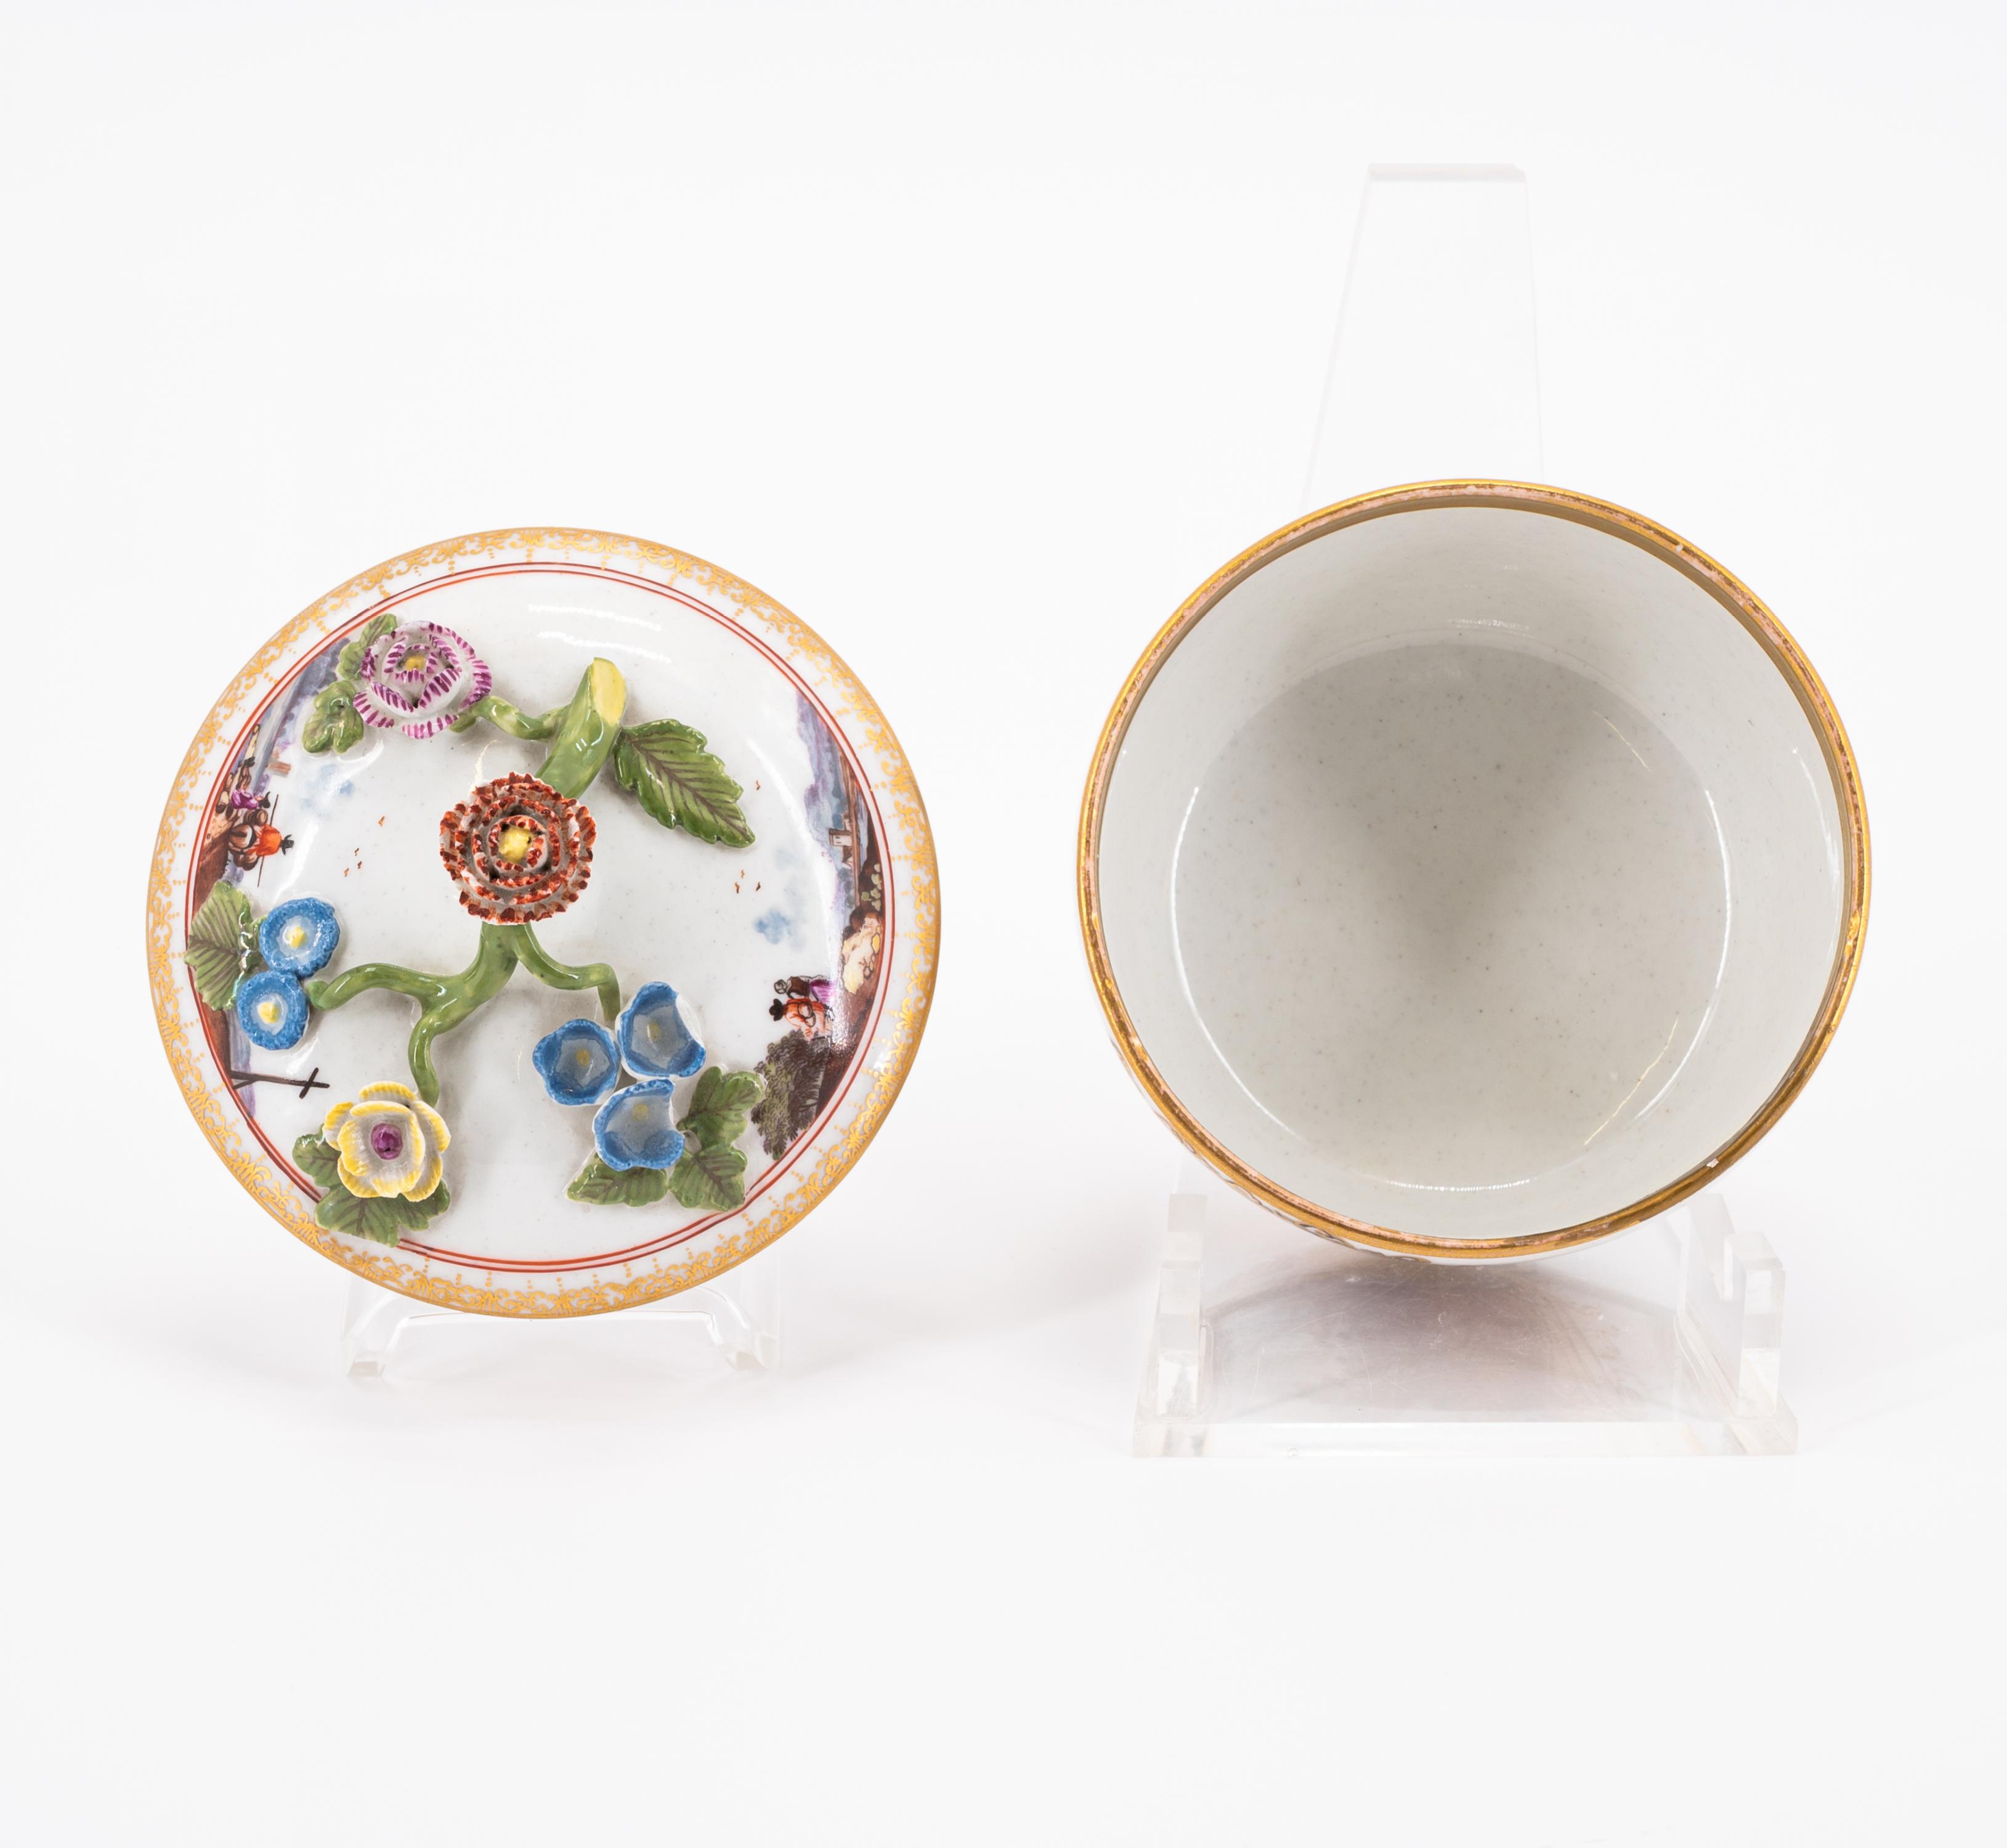 SUGAR BOWL WITH LID WITH LANDSCAPE CARTOUCHES AND APPLIED FLOWERS - Image 5 of 6